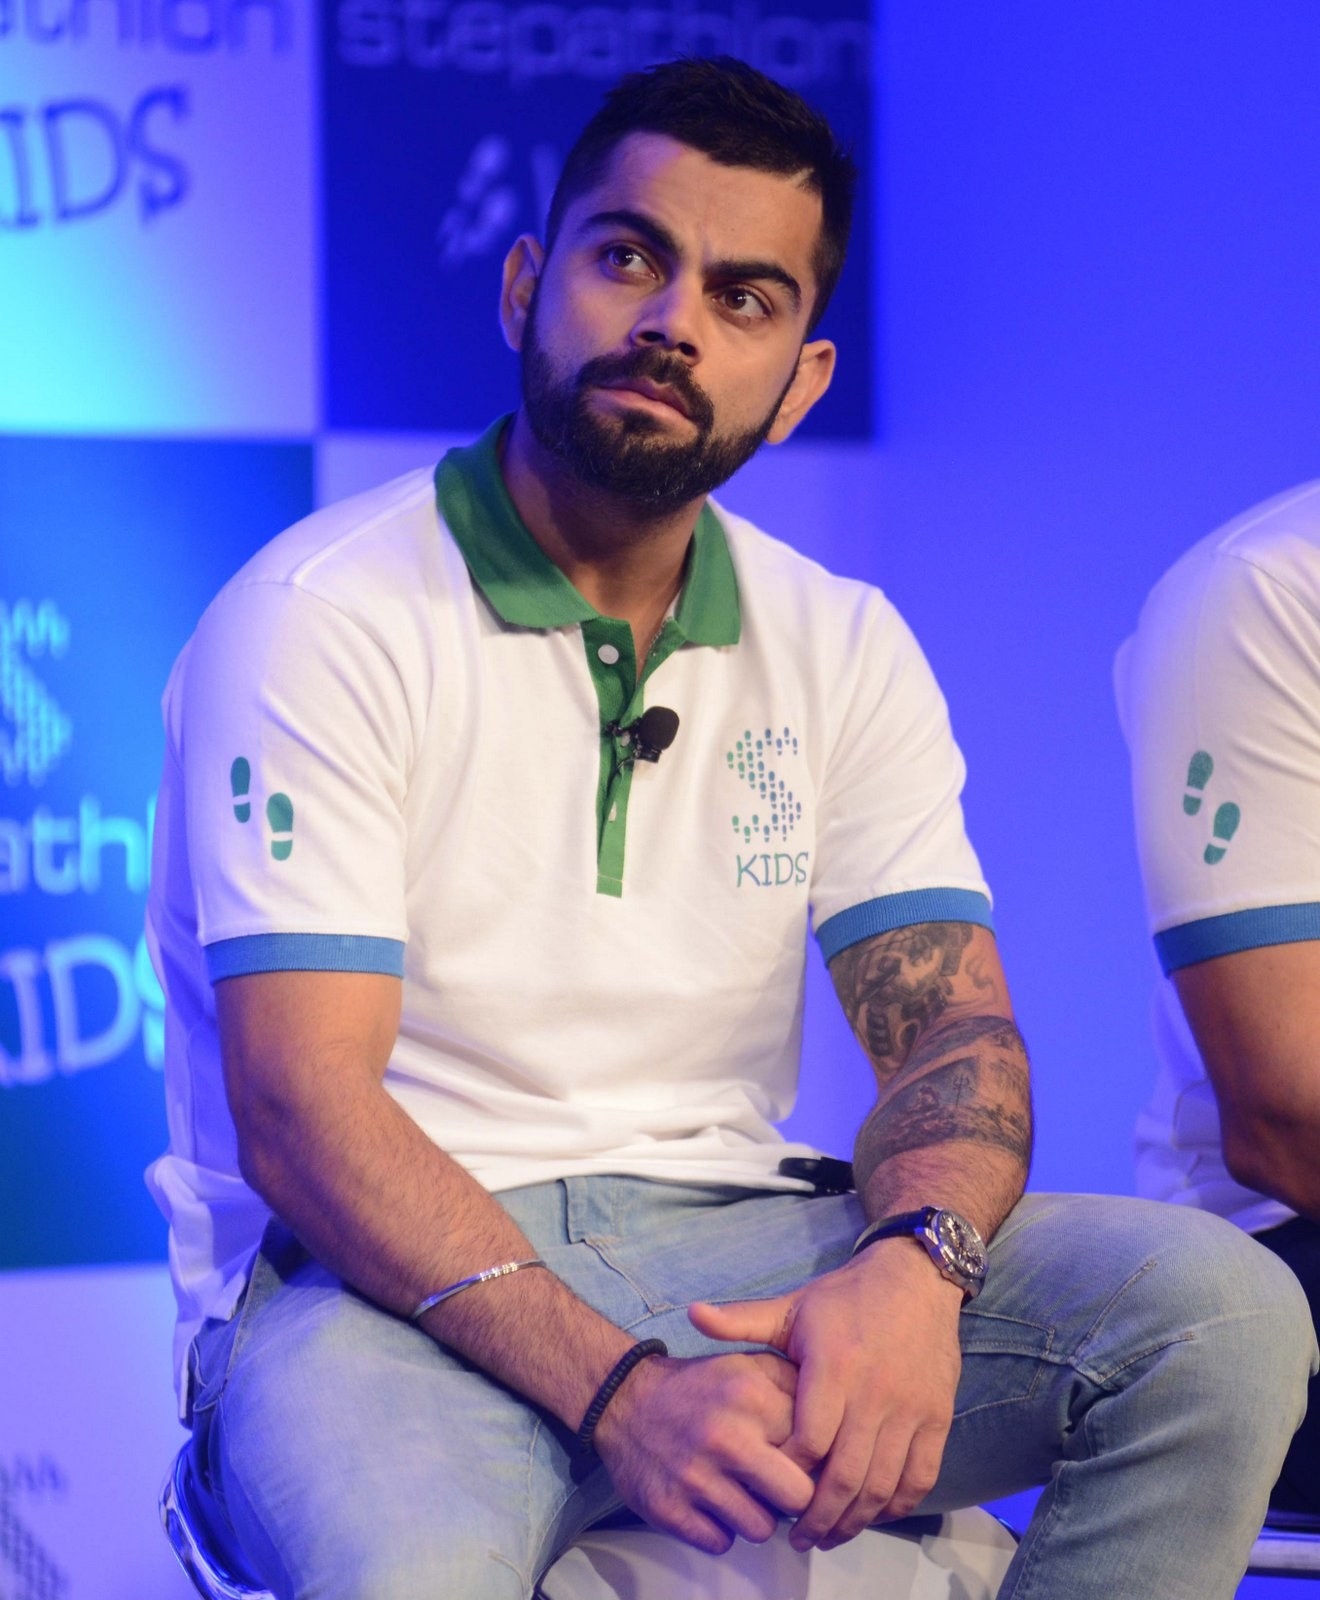 Virat Kohli dons a new look before the ICC T20 World Cup - Crictoday